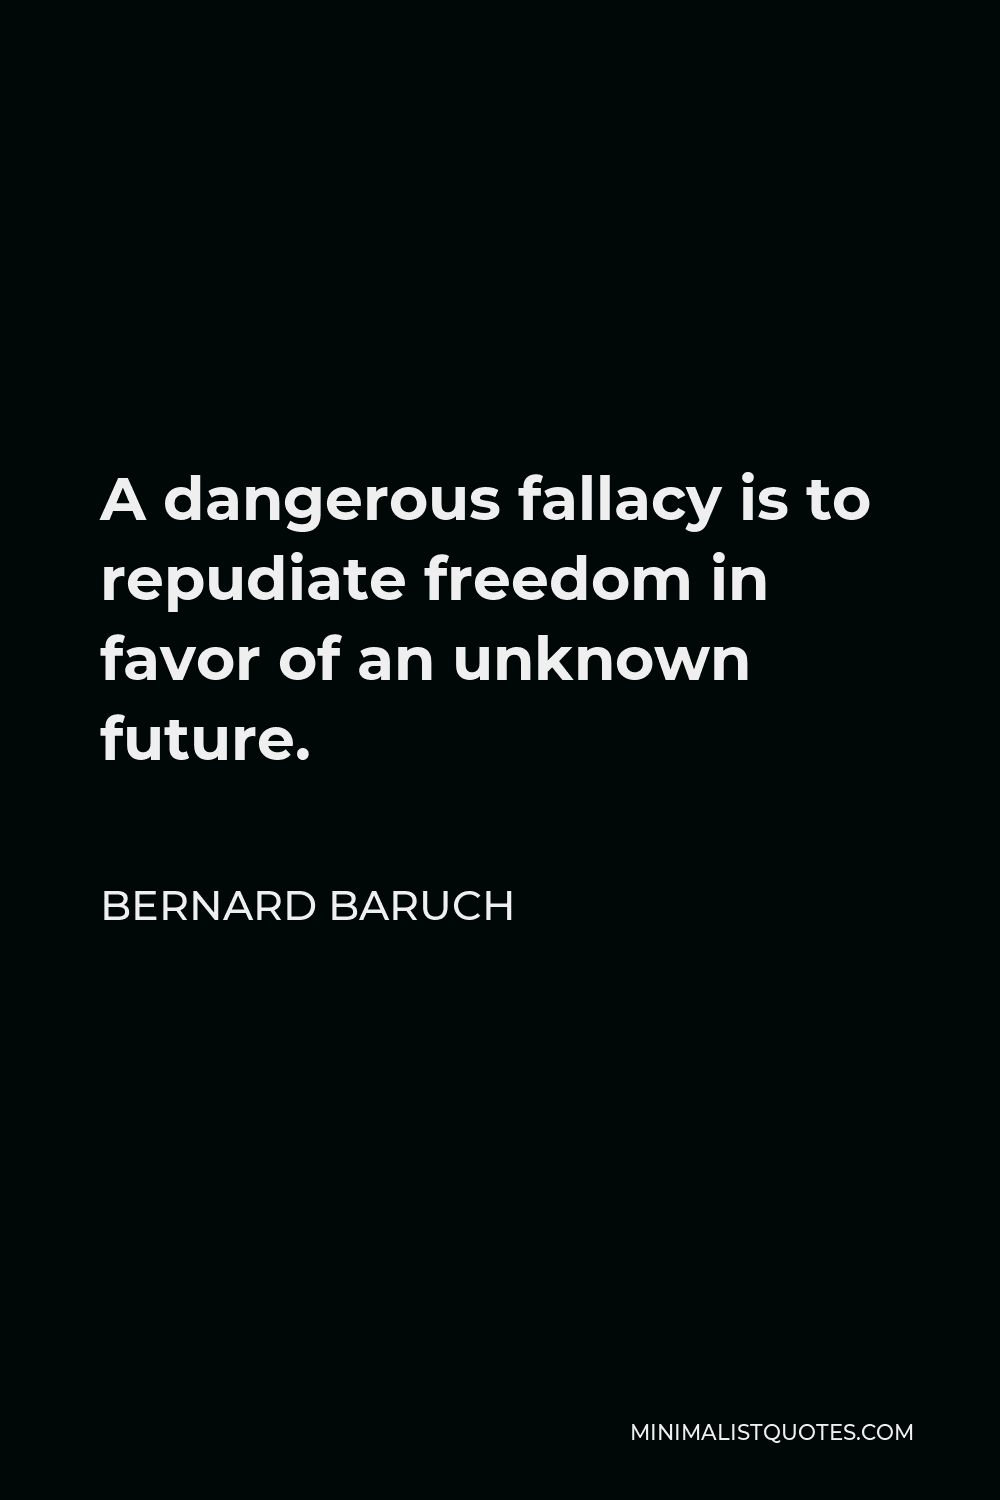 Bernard Baruch Quote - A dangerous fallacy is to repudiate freedom in favor of an unknown future.